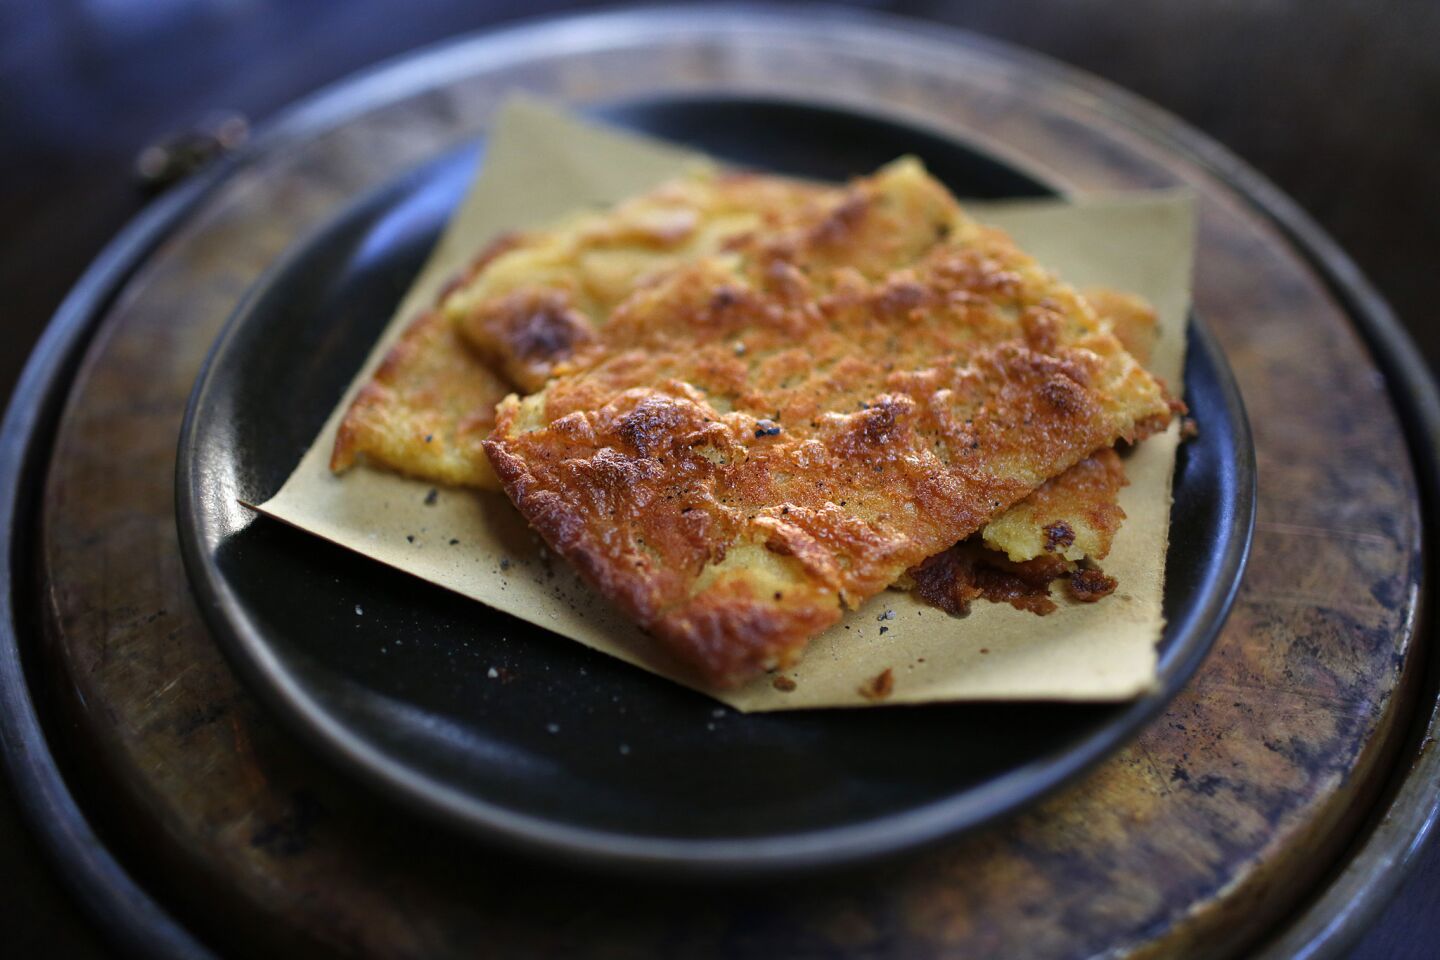 Farinata, a crepe made with chickpea flour, isn't listed on the menu. So ask for it. It's a treat from Genoa.